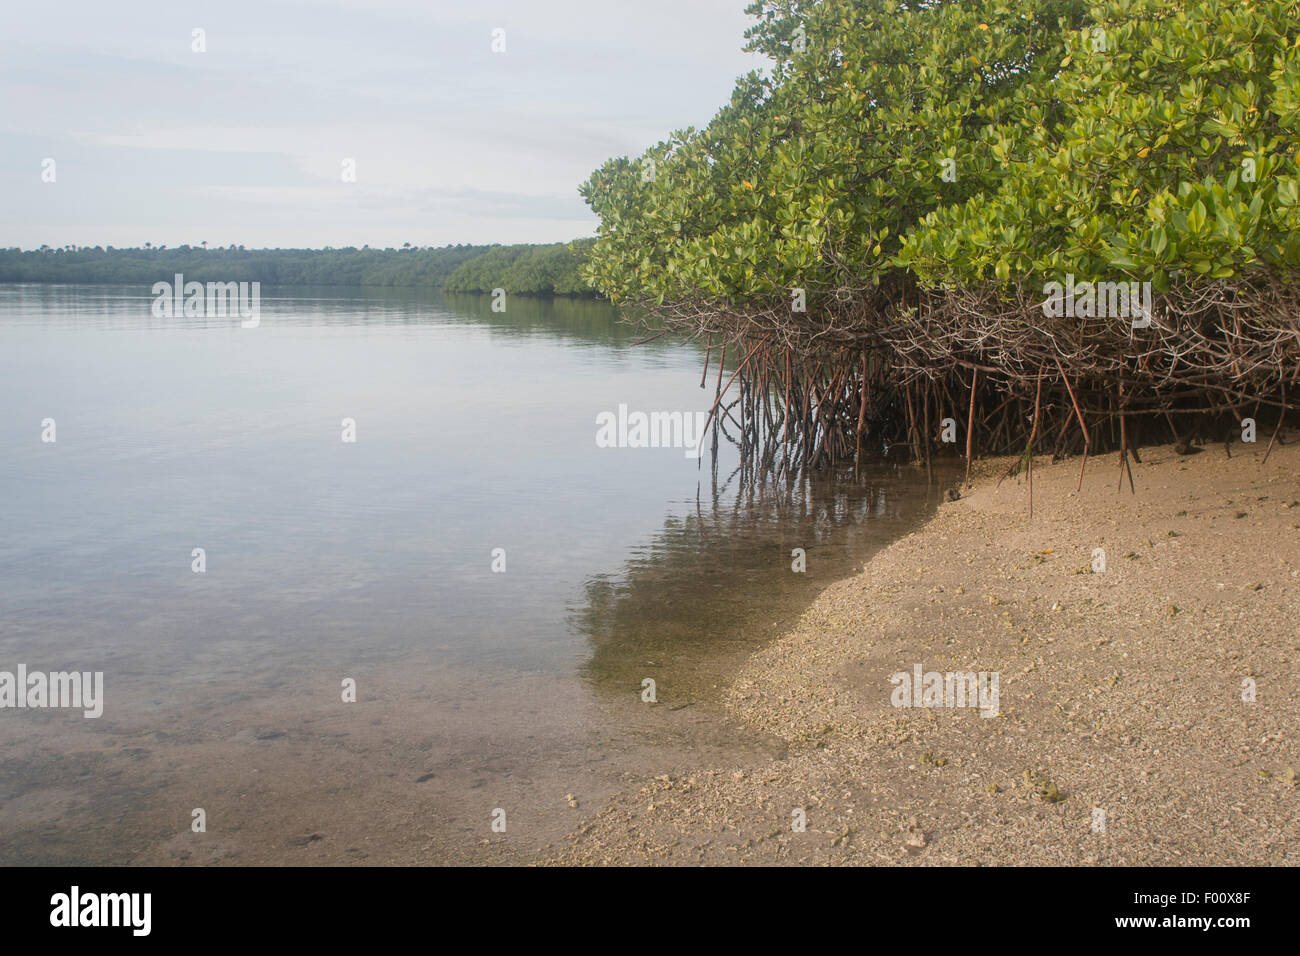 Mangrove forest at Baluran National Park in Java, Indonesia. Stock Photo